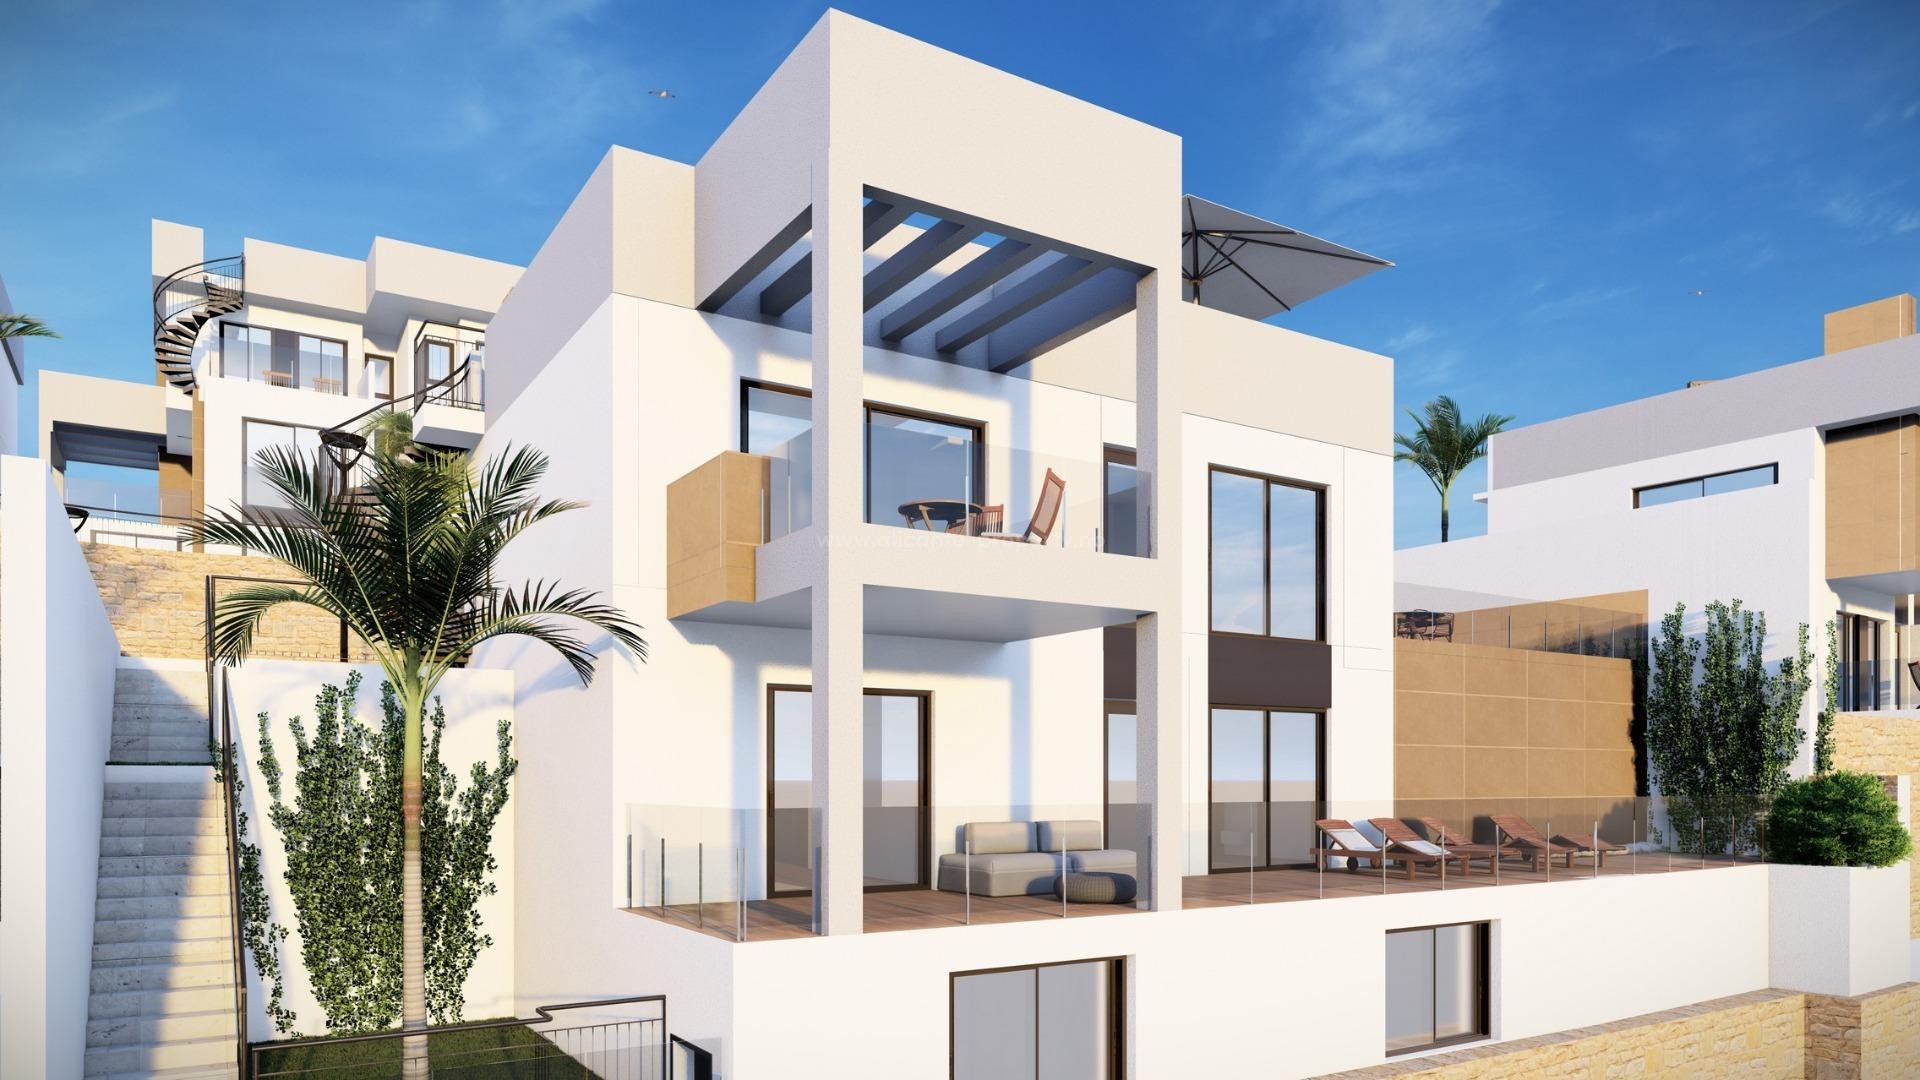 Brand new houses/villas in La Finca Golf, Algorfa, 2 bedrooms, 2 bathrooms, terrace and solarium, half-basement and garden with parking. Possible with private pool